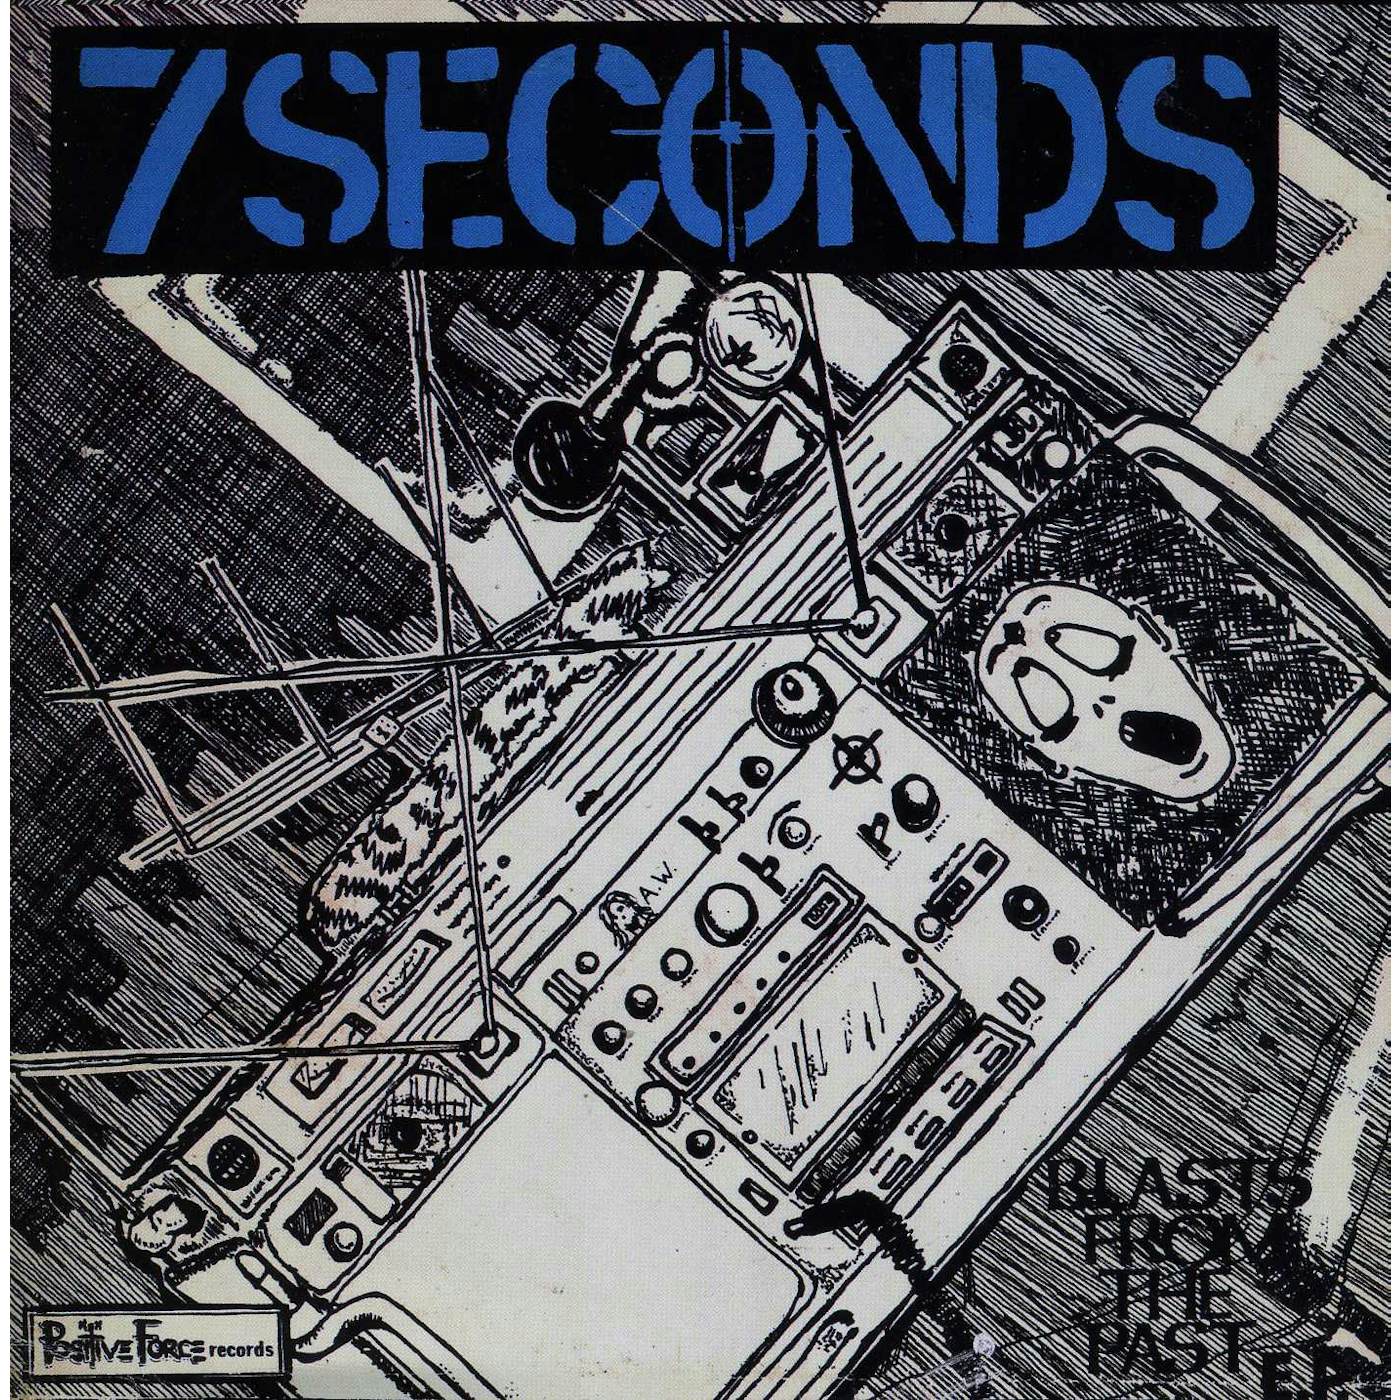 7 Seconds BLASTS FROM THE PASTS Vinyl Record